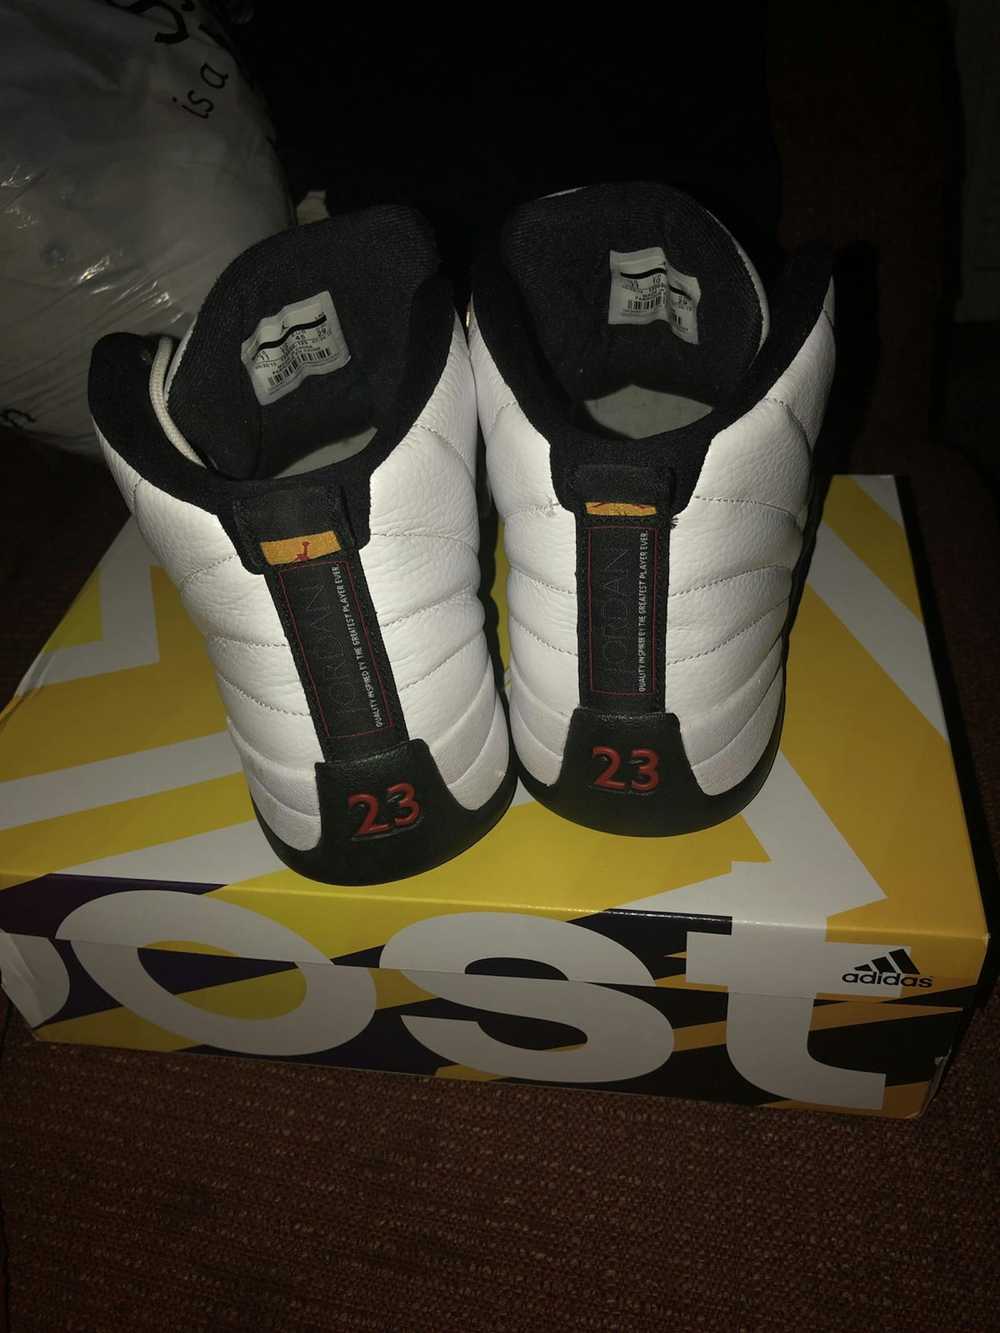 Nike Taxi 12s - image 4